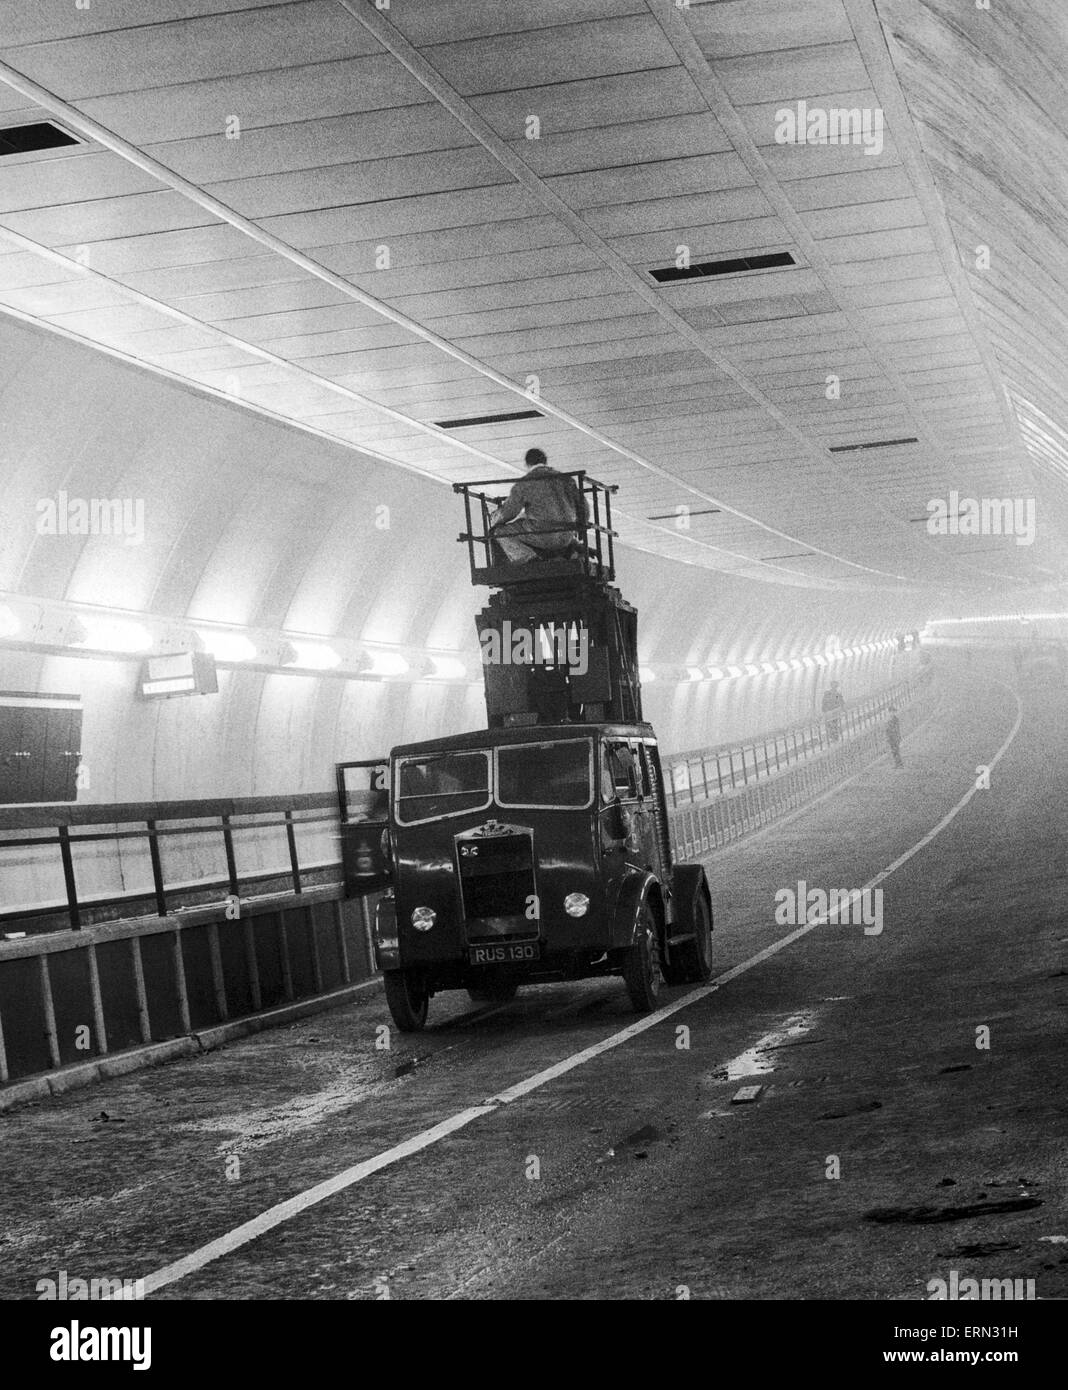 Work still in progress on the air ventilators in the new Clyde tunnel in Glasgow which connects the districts of Whiteinch in the north to Govan in the South in the west of the city, pictured shortly before its opening. June 1963. Stock Photo